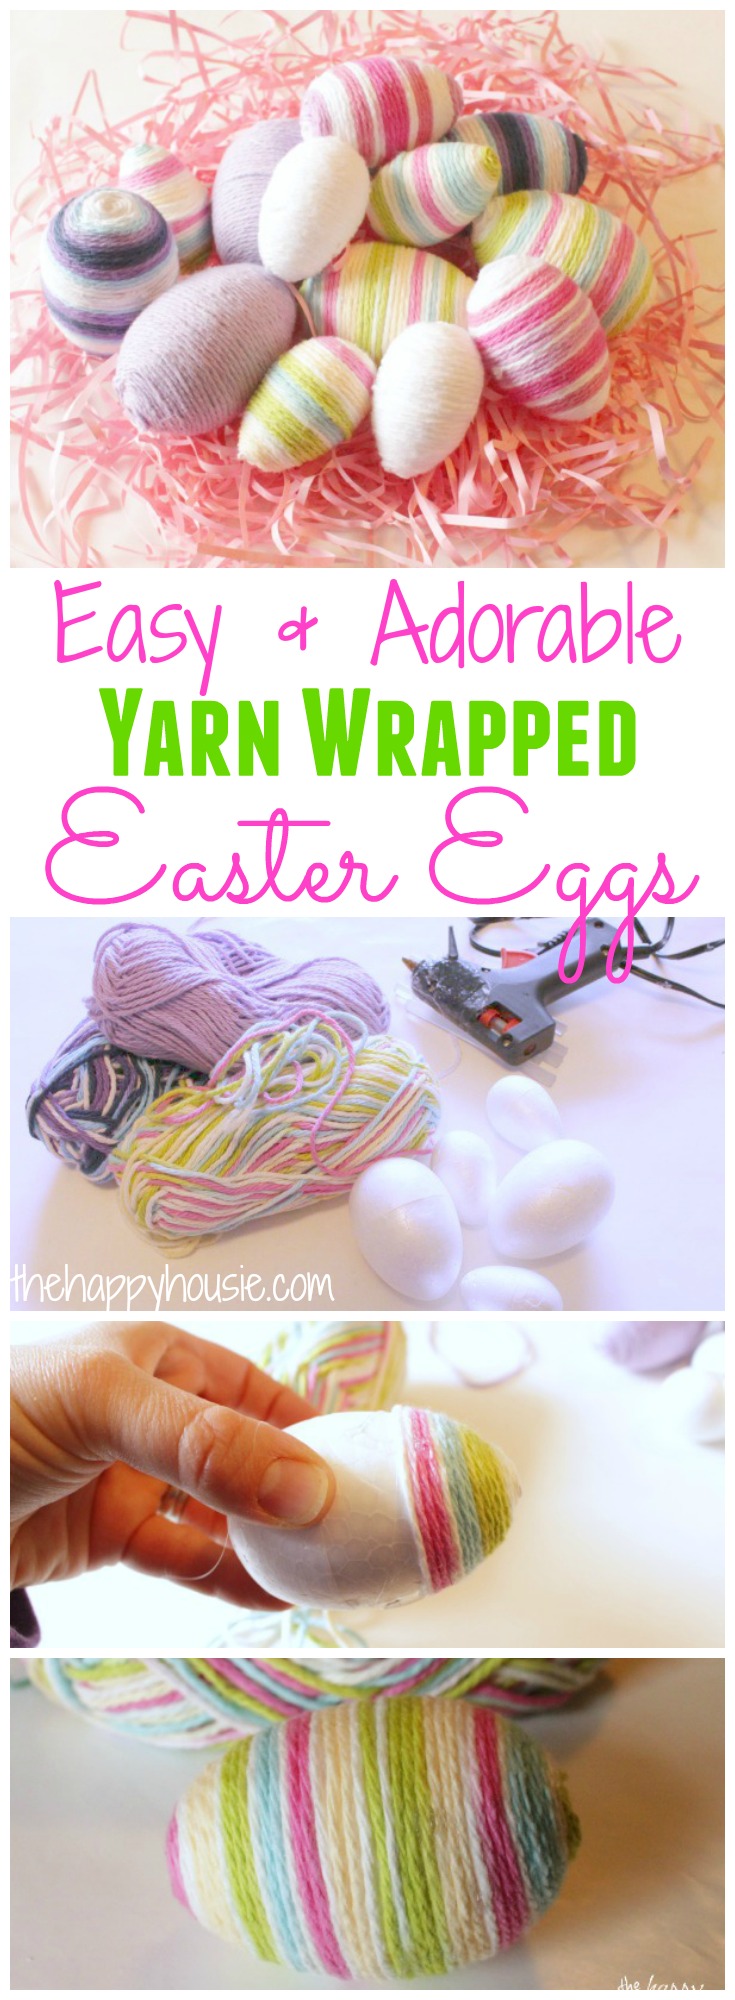 How to make your own Easy and Adorable Yarn Wrapped Easter Eggs at thehappyhousie.com